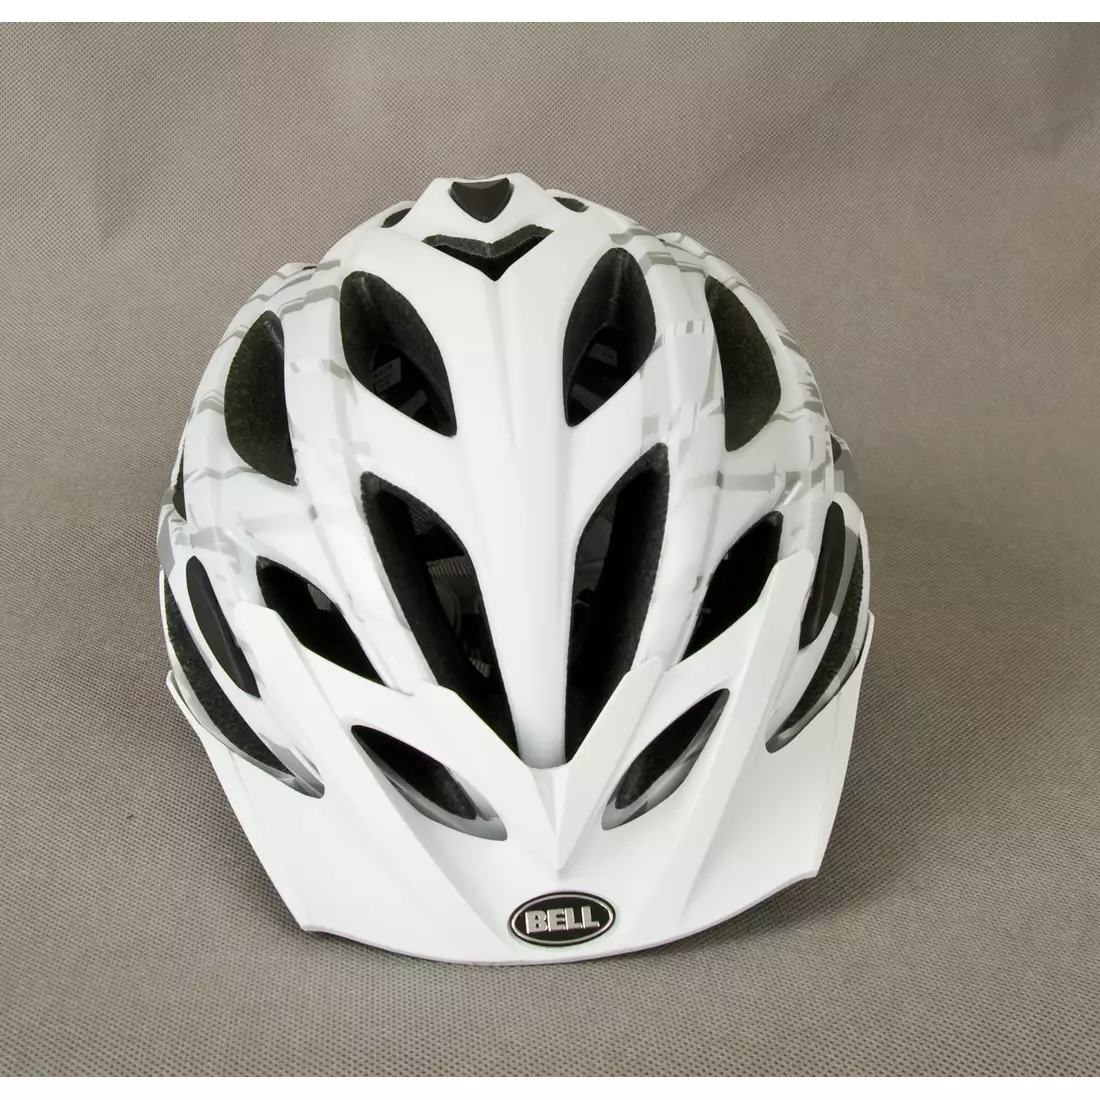 BELL kask rowerowy SEQUENCE silver white